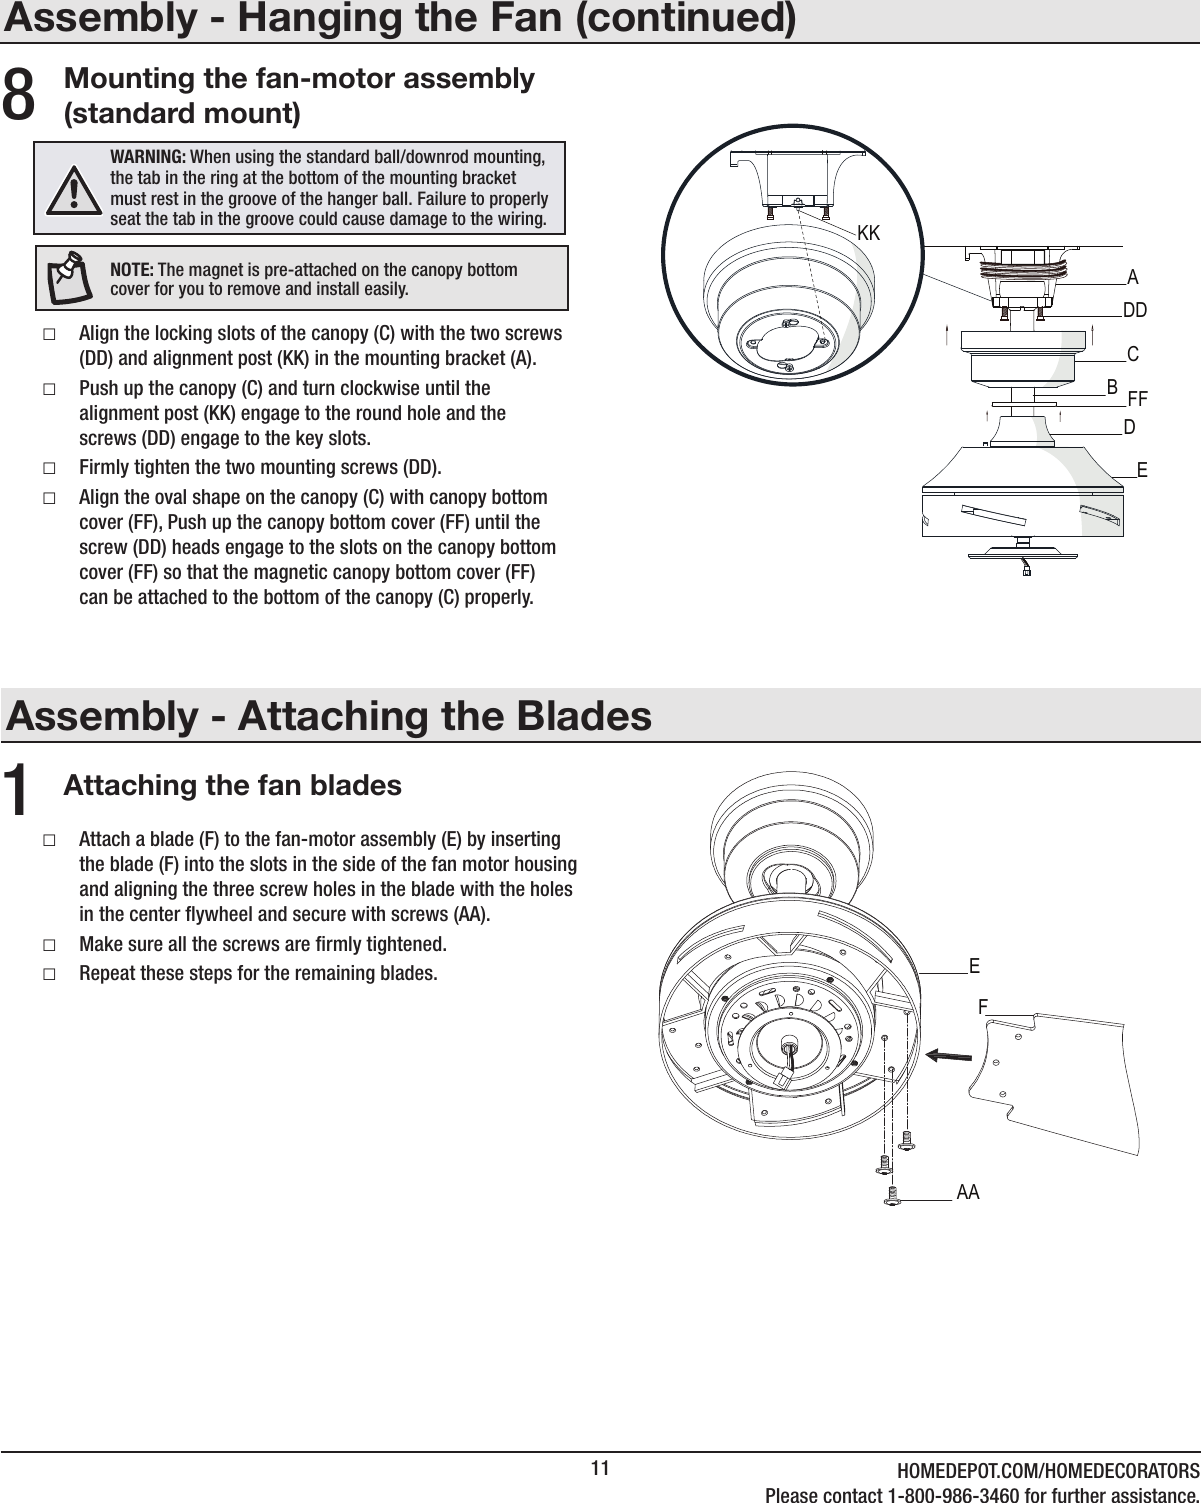 11 HOMEDEPOT.COM/HOMEDECORATORSPlease contact 1-800-986-3460 for further assistance.Assembly - Attaching the BladesAttaching the fan blades1 □Attach a blade (F) to the fan-motor assembly (E) by inserting the blade (F) into the slots in the side of the fan motor housing and aligning the three screw holes in the blade with the holes in the center ywheel and secure with screws (AA). □Make sure all the screws are rmly tightened. □Repeat these steps for the remaining blades.Assembly - Hanging the Fan (continued)Mounting the fan-motor assembly (standard mount) □Align the locking slots of the canopy (C) with the two screws (DD) and alignment post (KK) in the mounting bracket (A). □Push up the canopy (C) and turn clockwise until the alignment post (KK) engage to the round hole and the screws (DD) engage to the key slots. □Firmly tighten the two mounting screws (DD). □Align the oval shape on the canopy (C) with canopy bottom cover (FF), Push up the canopy bottom cover (FF) until the screw (DD) heads engage to the slots on the canopy bottom cover (FF) so that the magnetic canopy bottom cover (FF) can be attached to the bottom of the canopy (C) properly.8WARNING: When using the standard ball/downrod mounting, the tab in the ring at the bottom of the mounting bracket must rest in the groove of the hanger ball. Failure to properly seat the tab in the groove could cause damage to the wiring.NOTE: The magnet is pre-attached on the canopy bottom cover for you to remove and install easily.CADDFFBEKKDAAEF